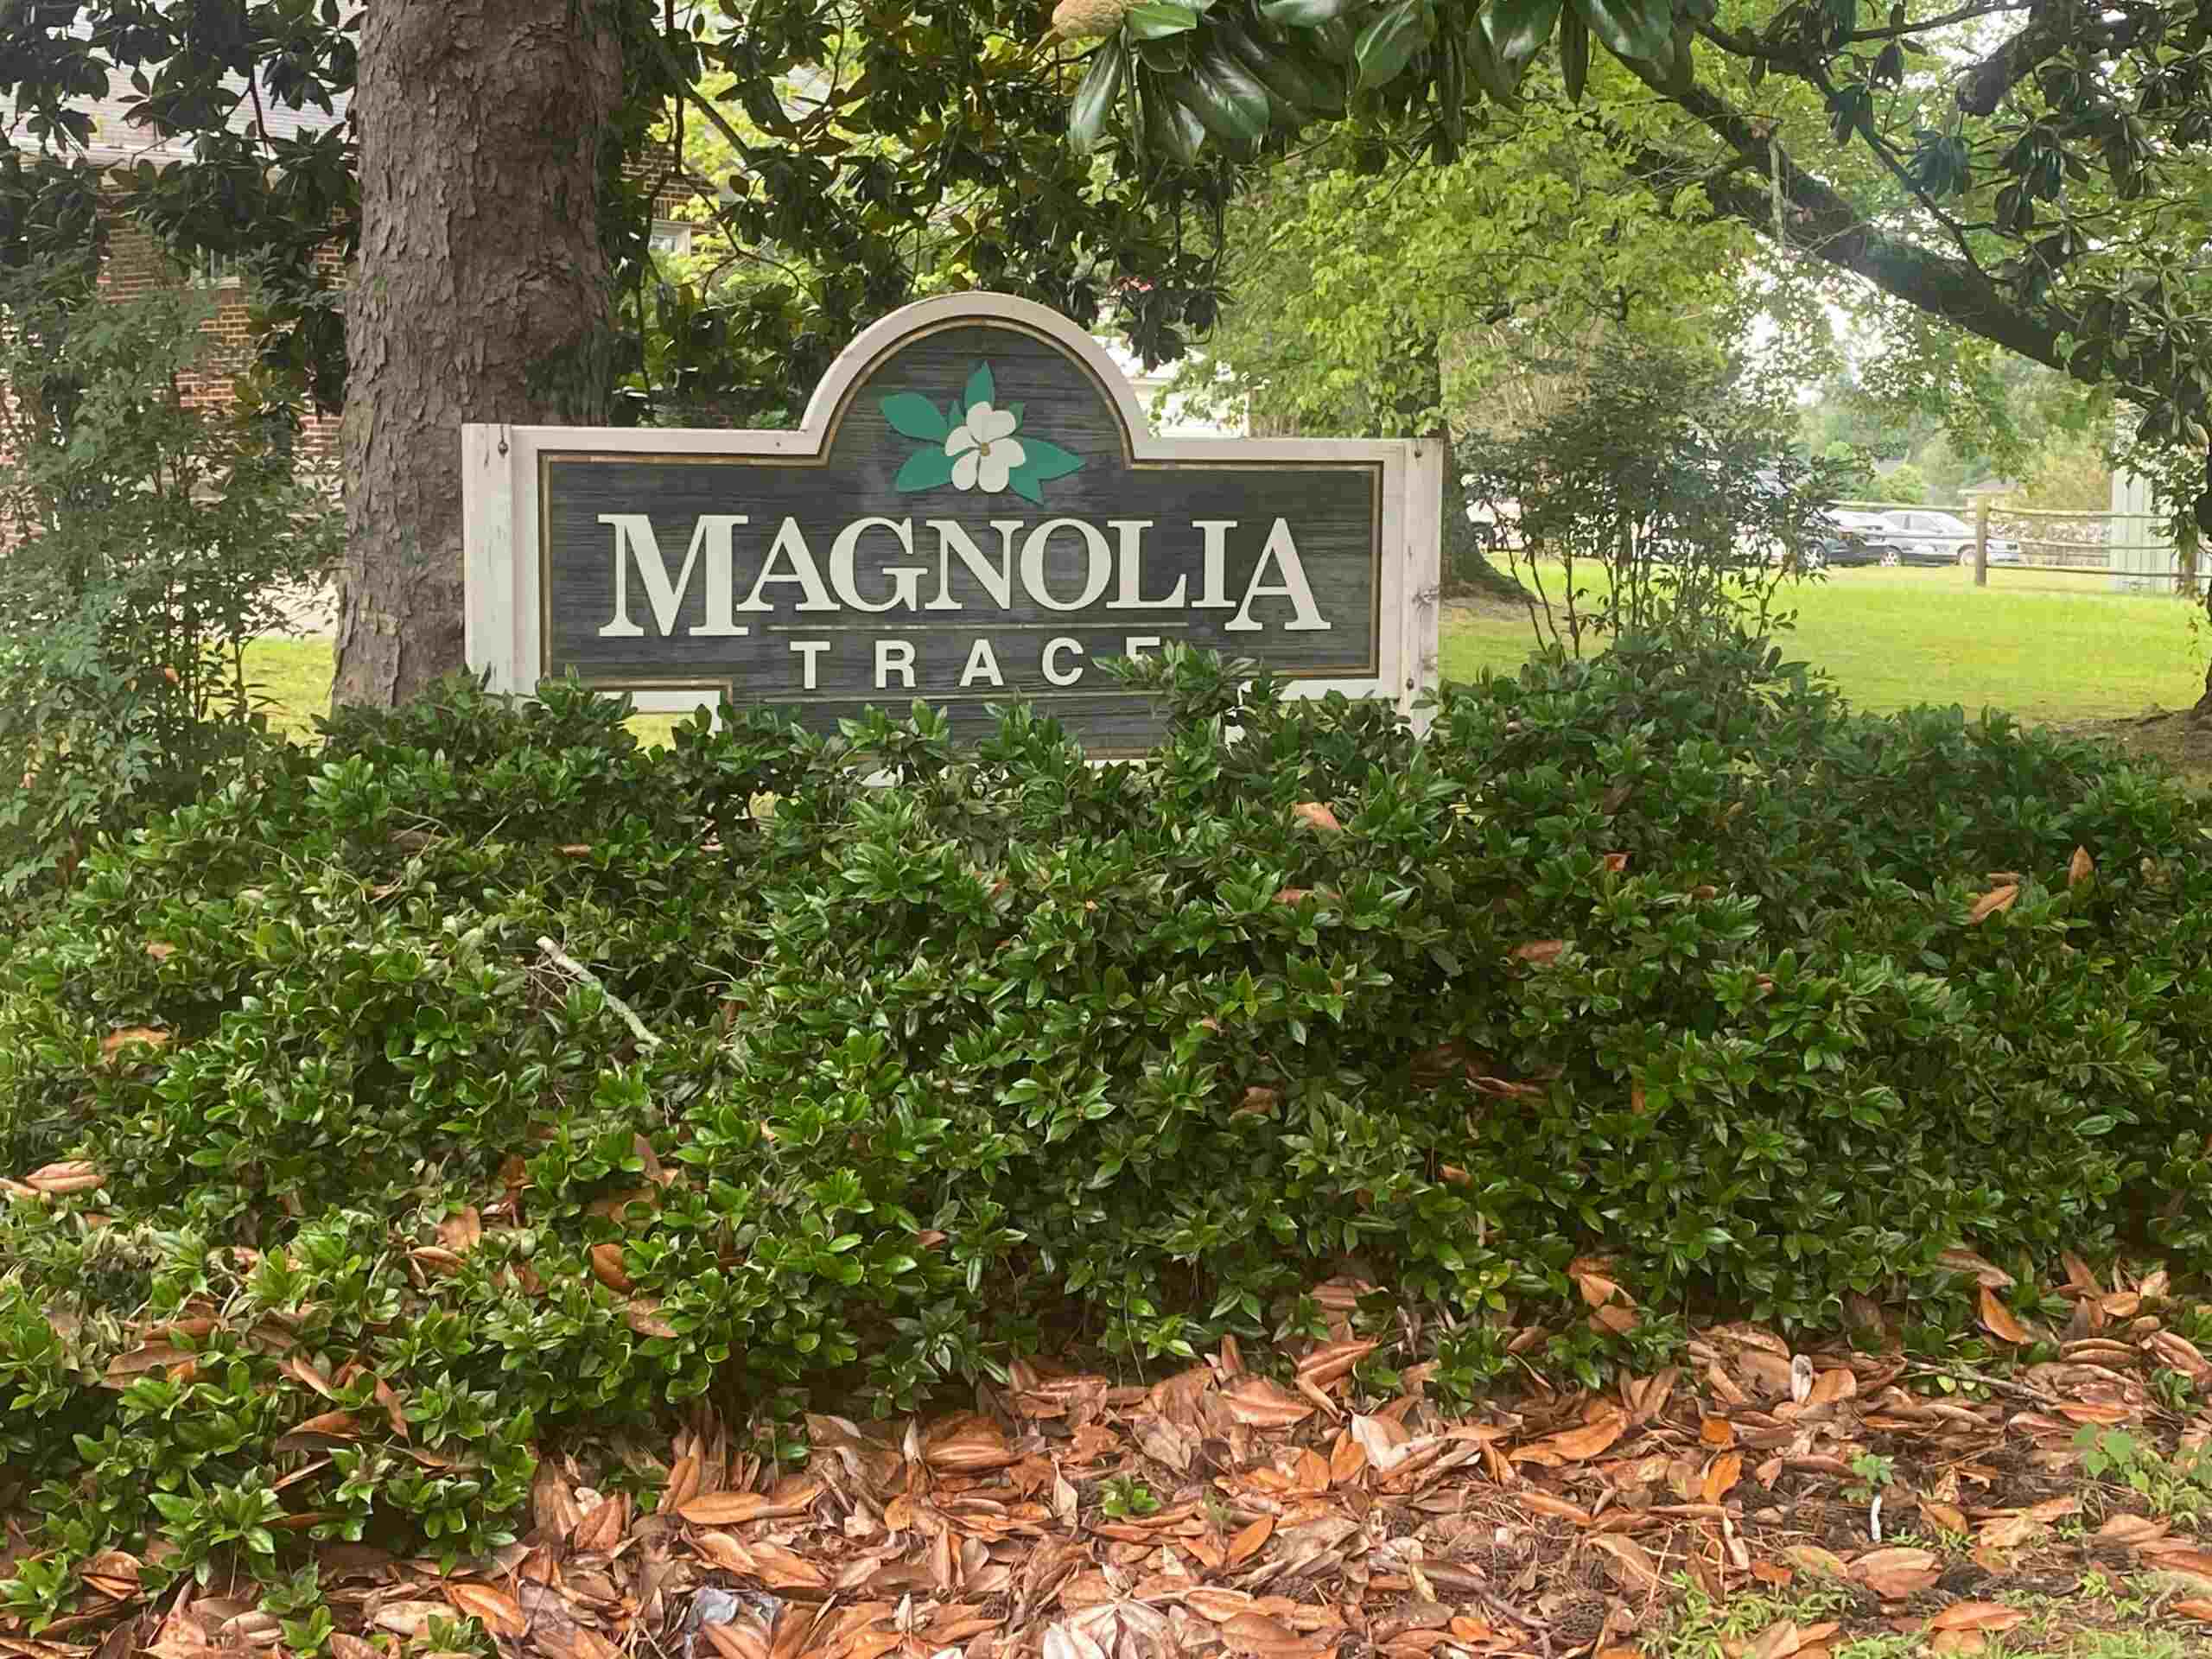 Magnolia Trace Name Board behind the bushes